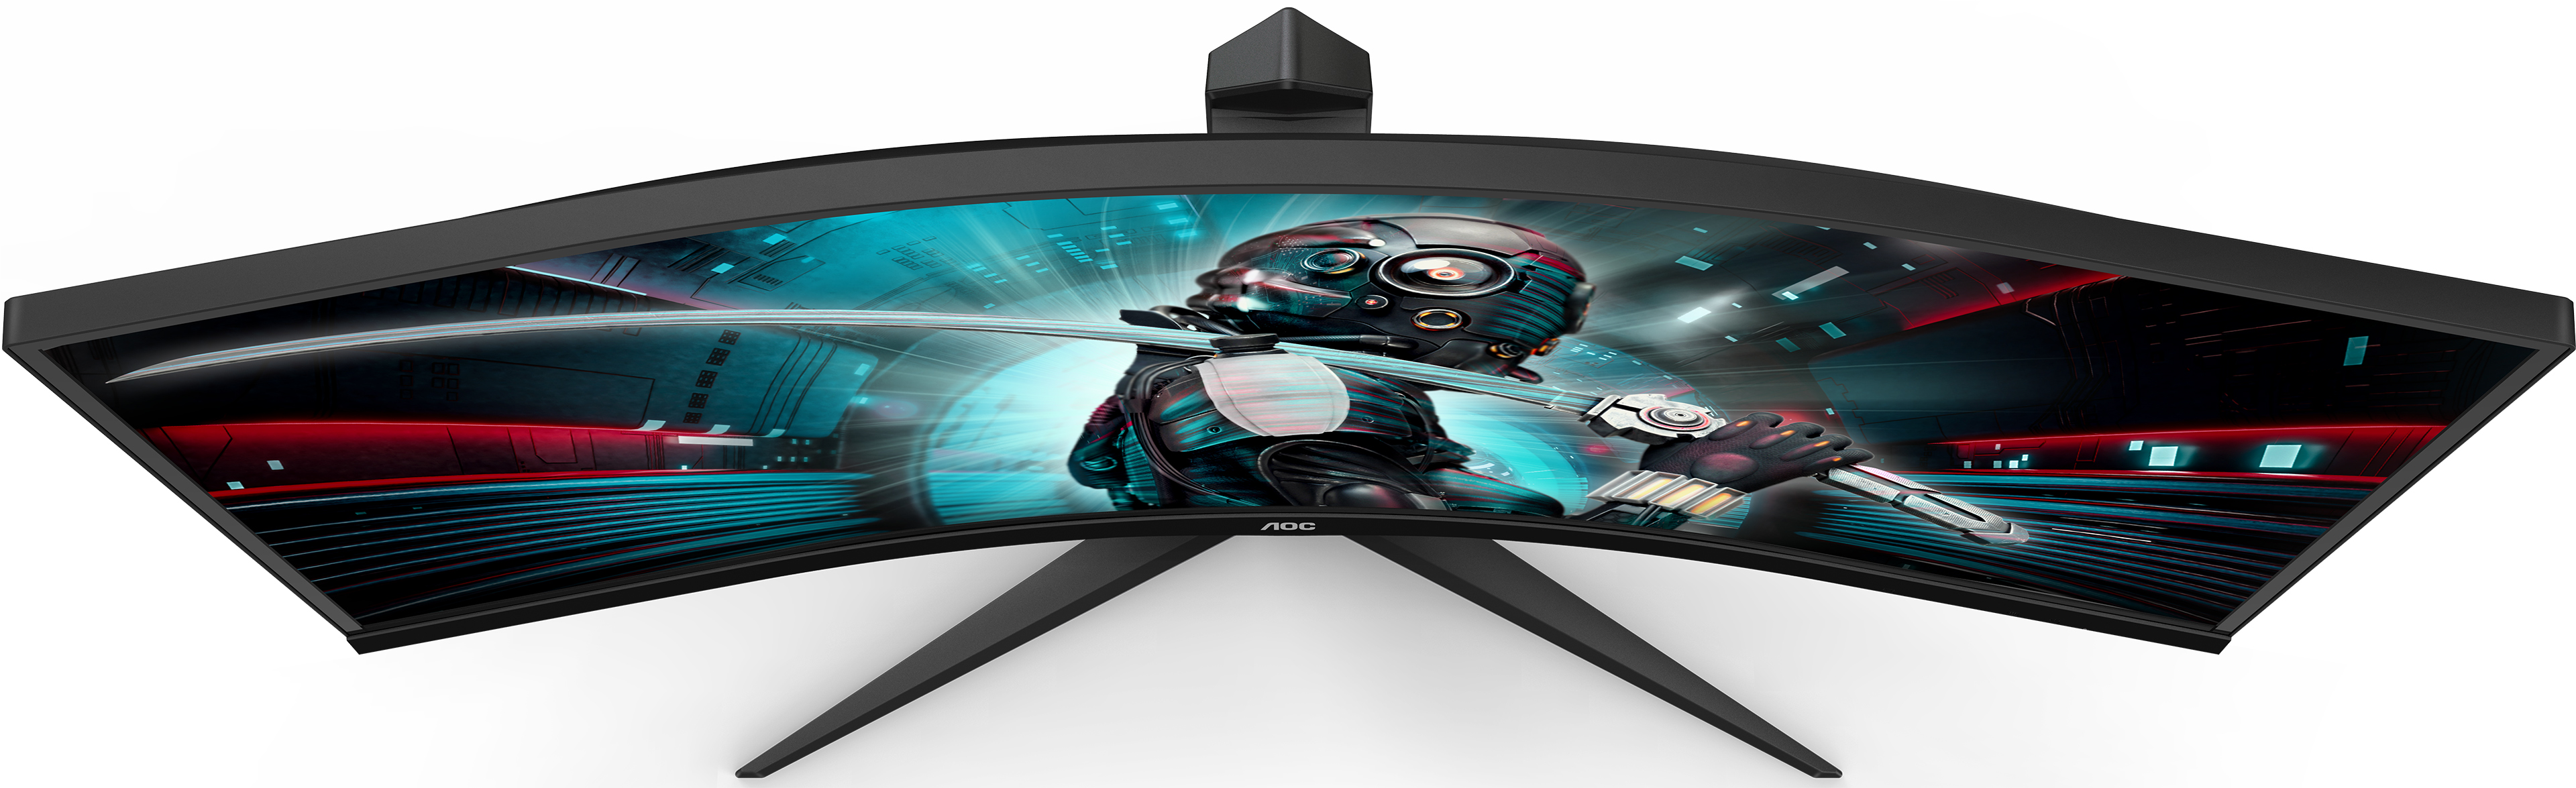 Aoc Reveals Two 34 Inch Curved Gaming Monitors Up To 144 Hz Freesync